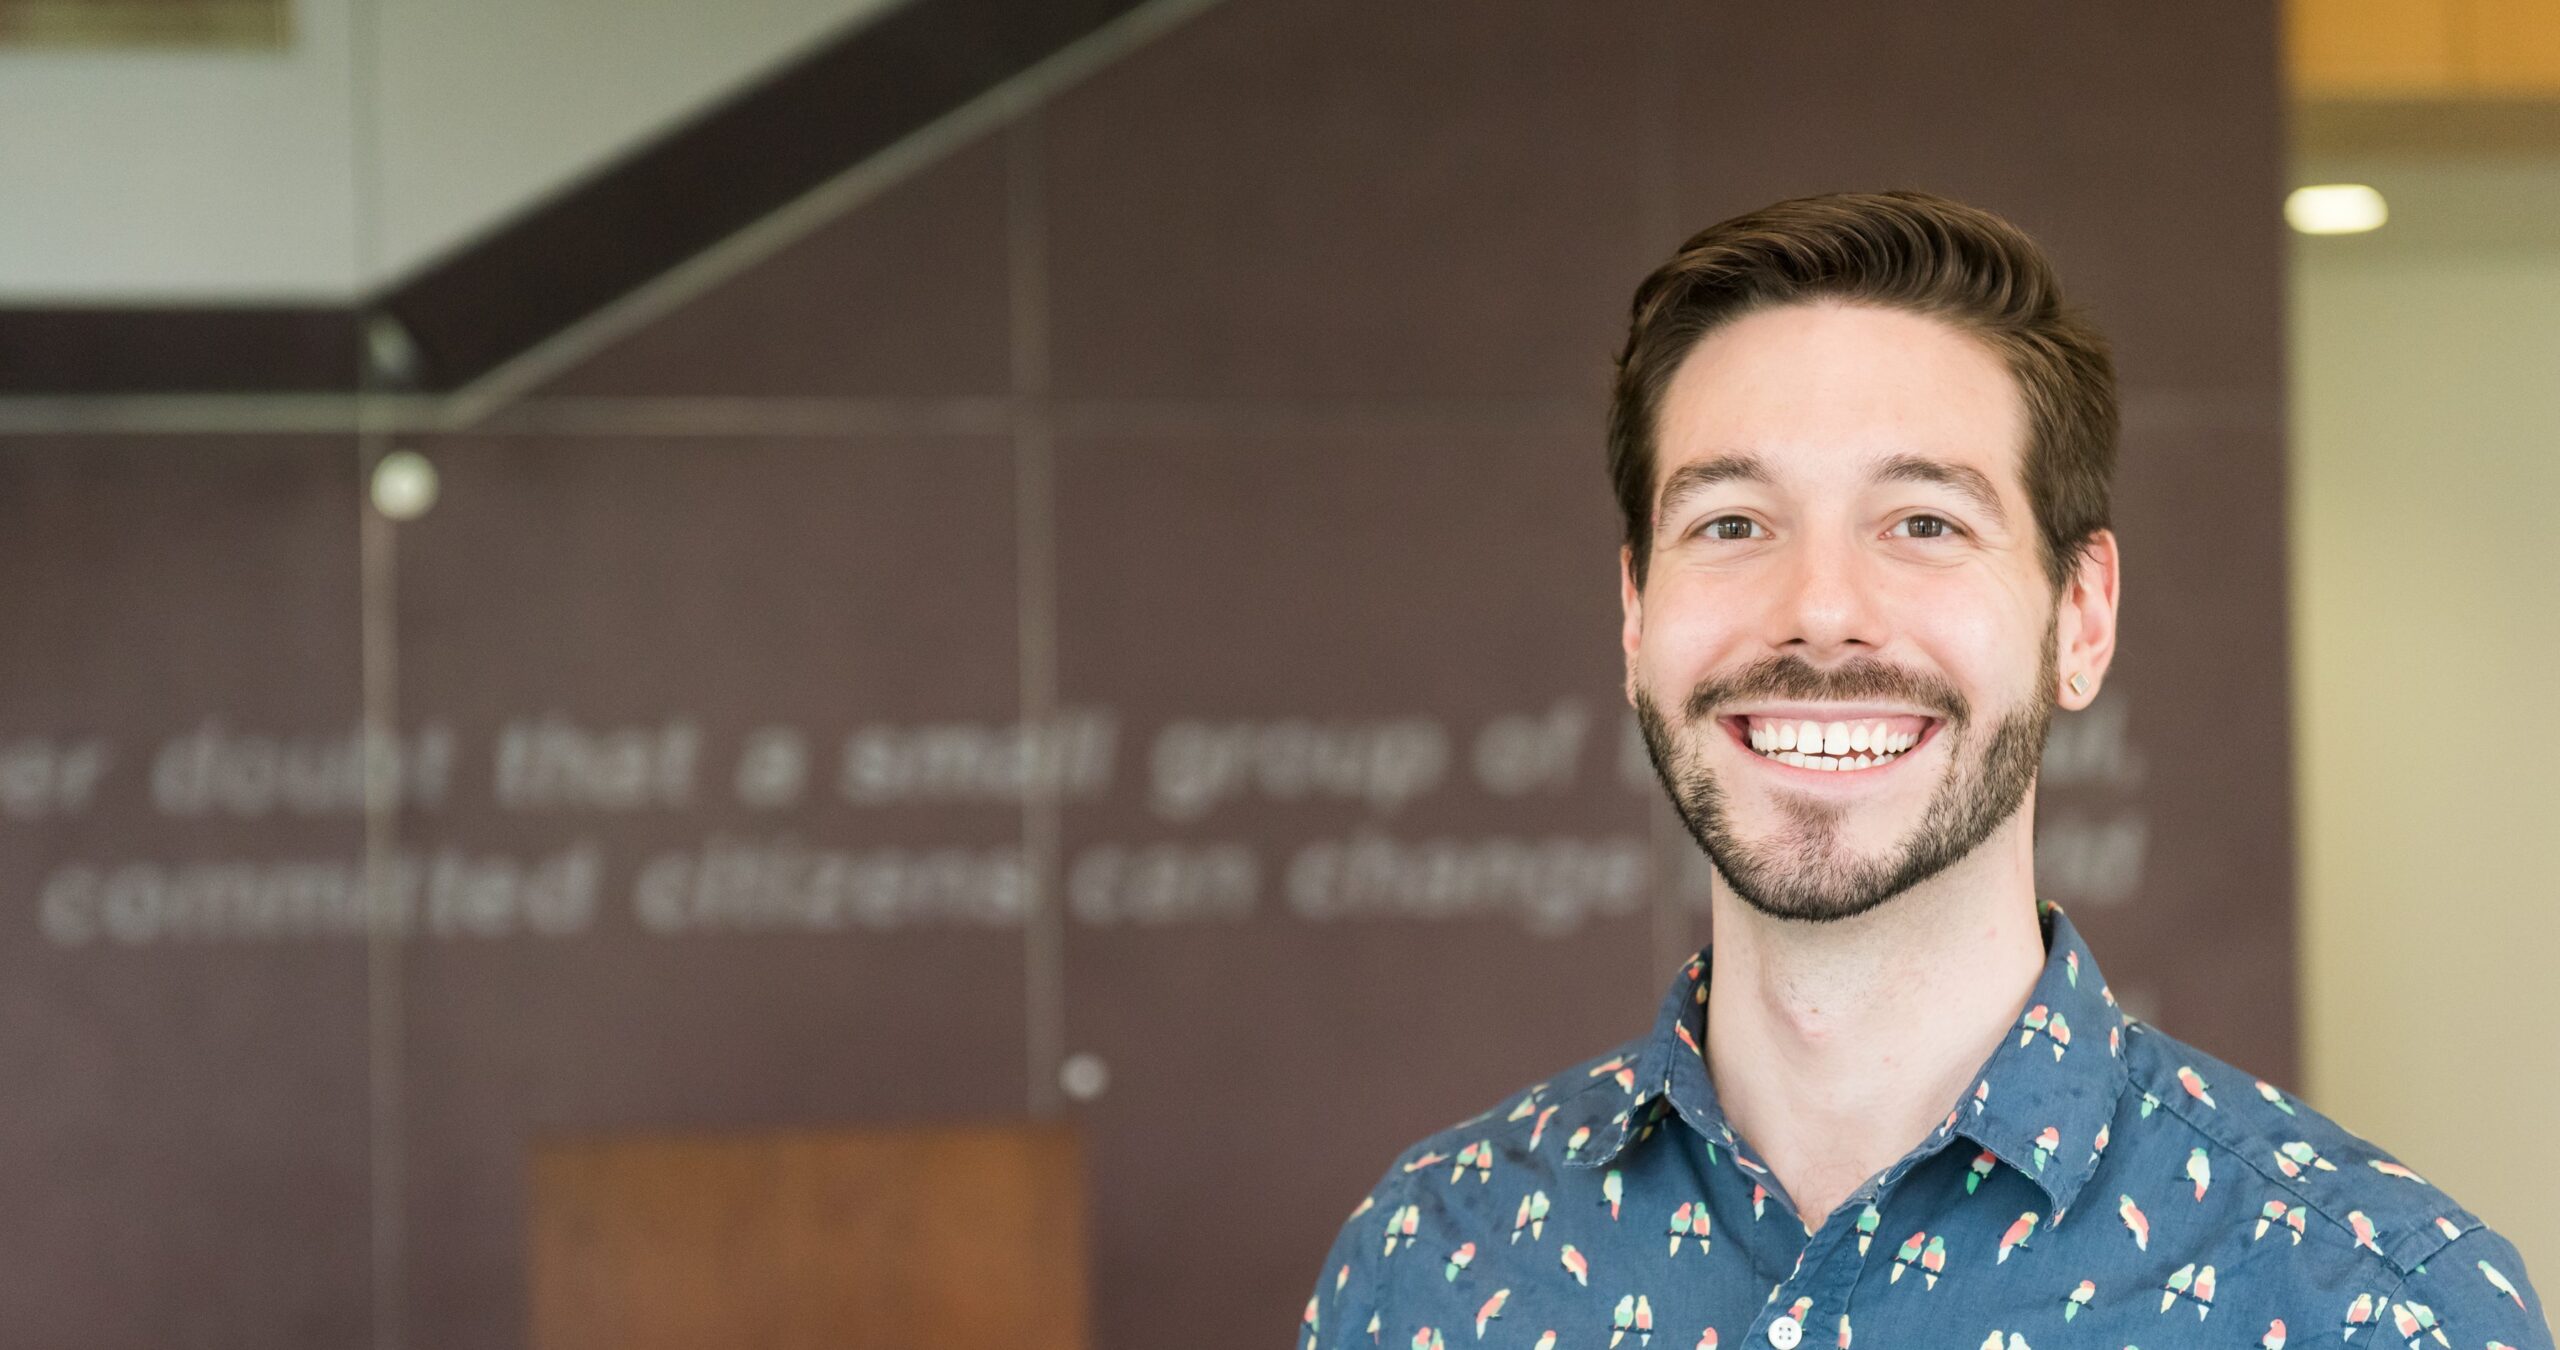 William Klotz, double alumnus of UMBC, earns Fulbright to teach in Mexico